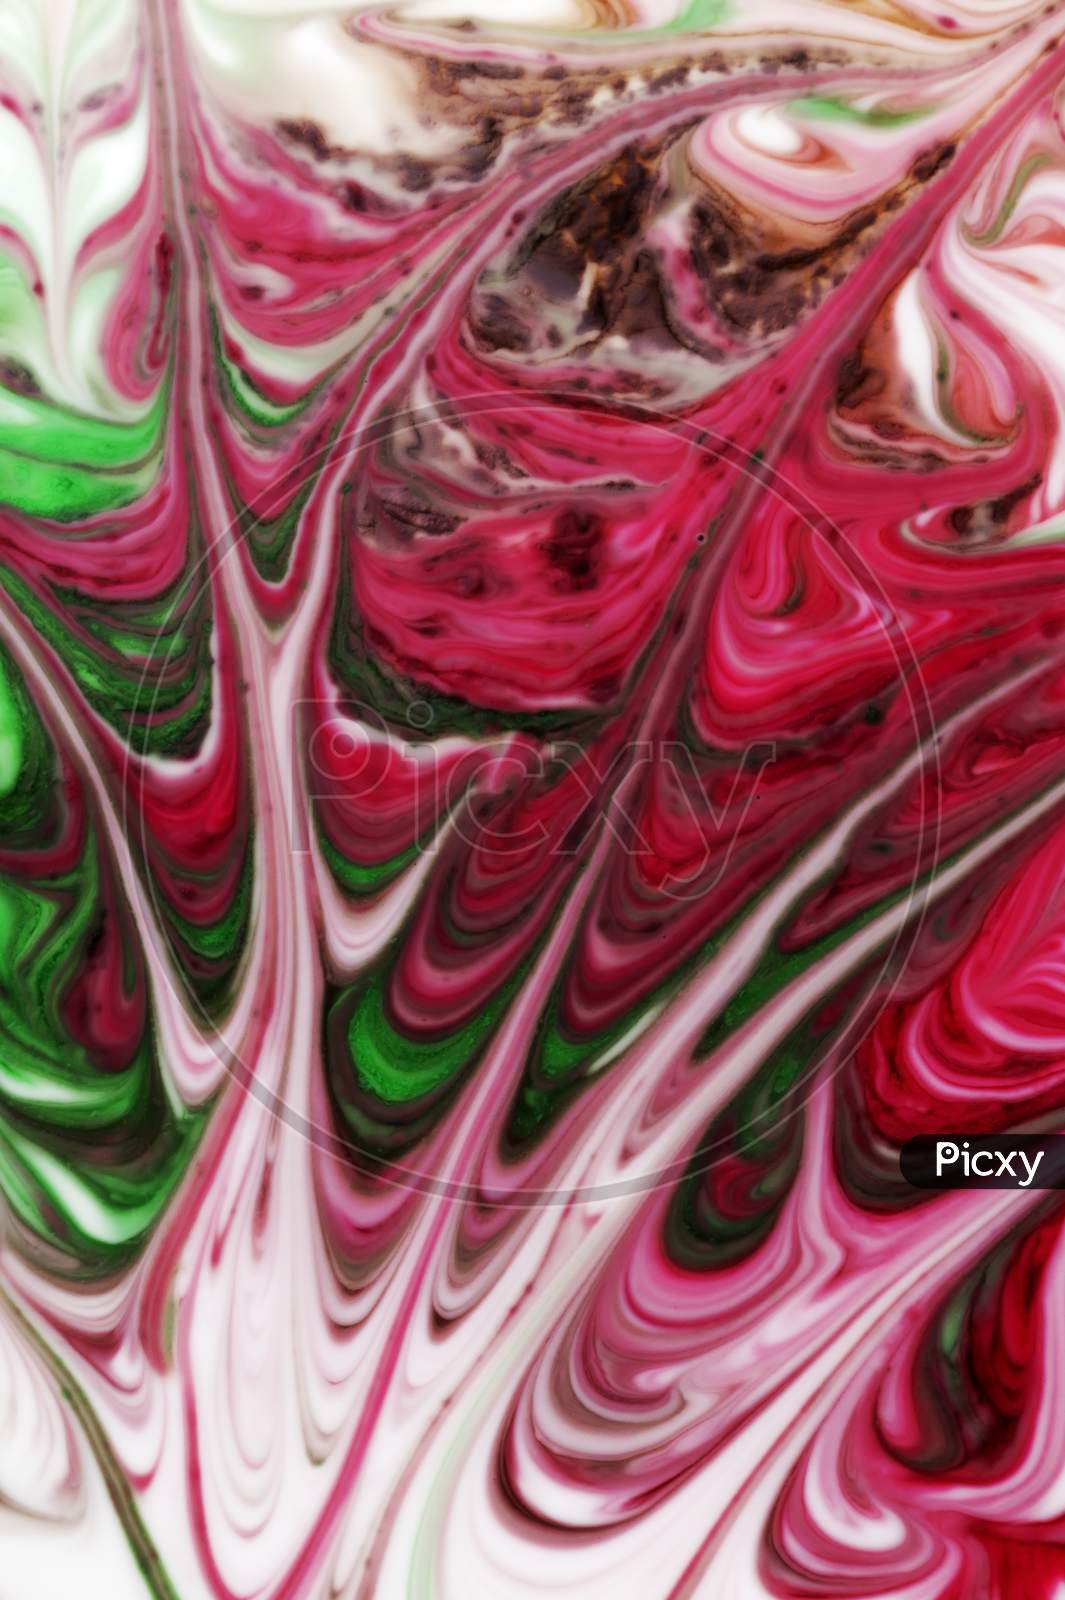 Colorful Liquid Paints Mixed Together